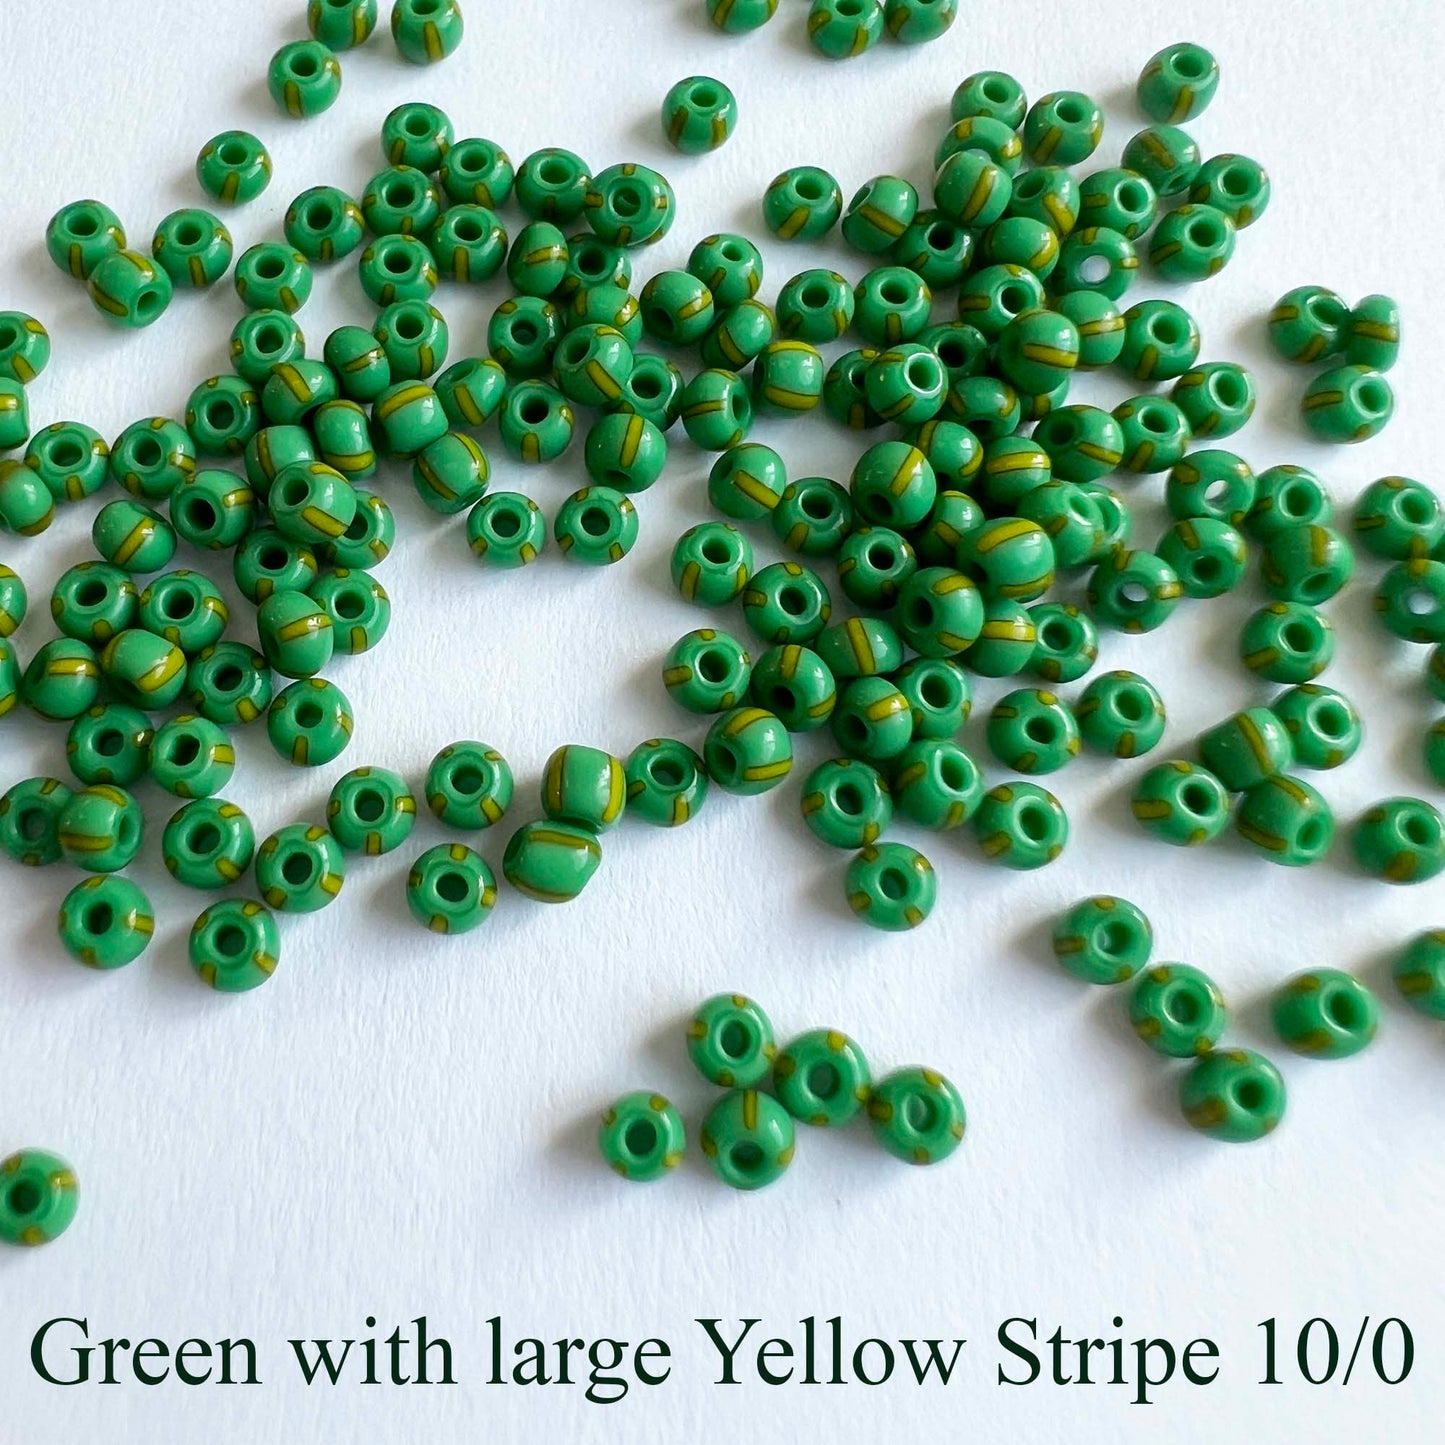 Striped Seed Beads Sizes 10 and 11